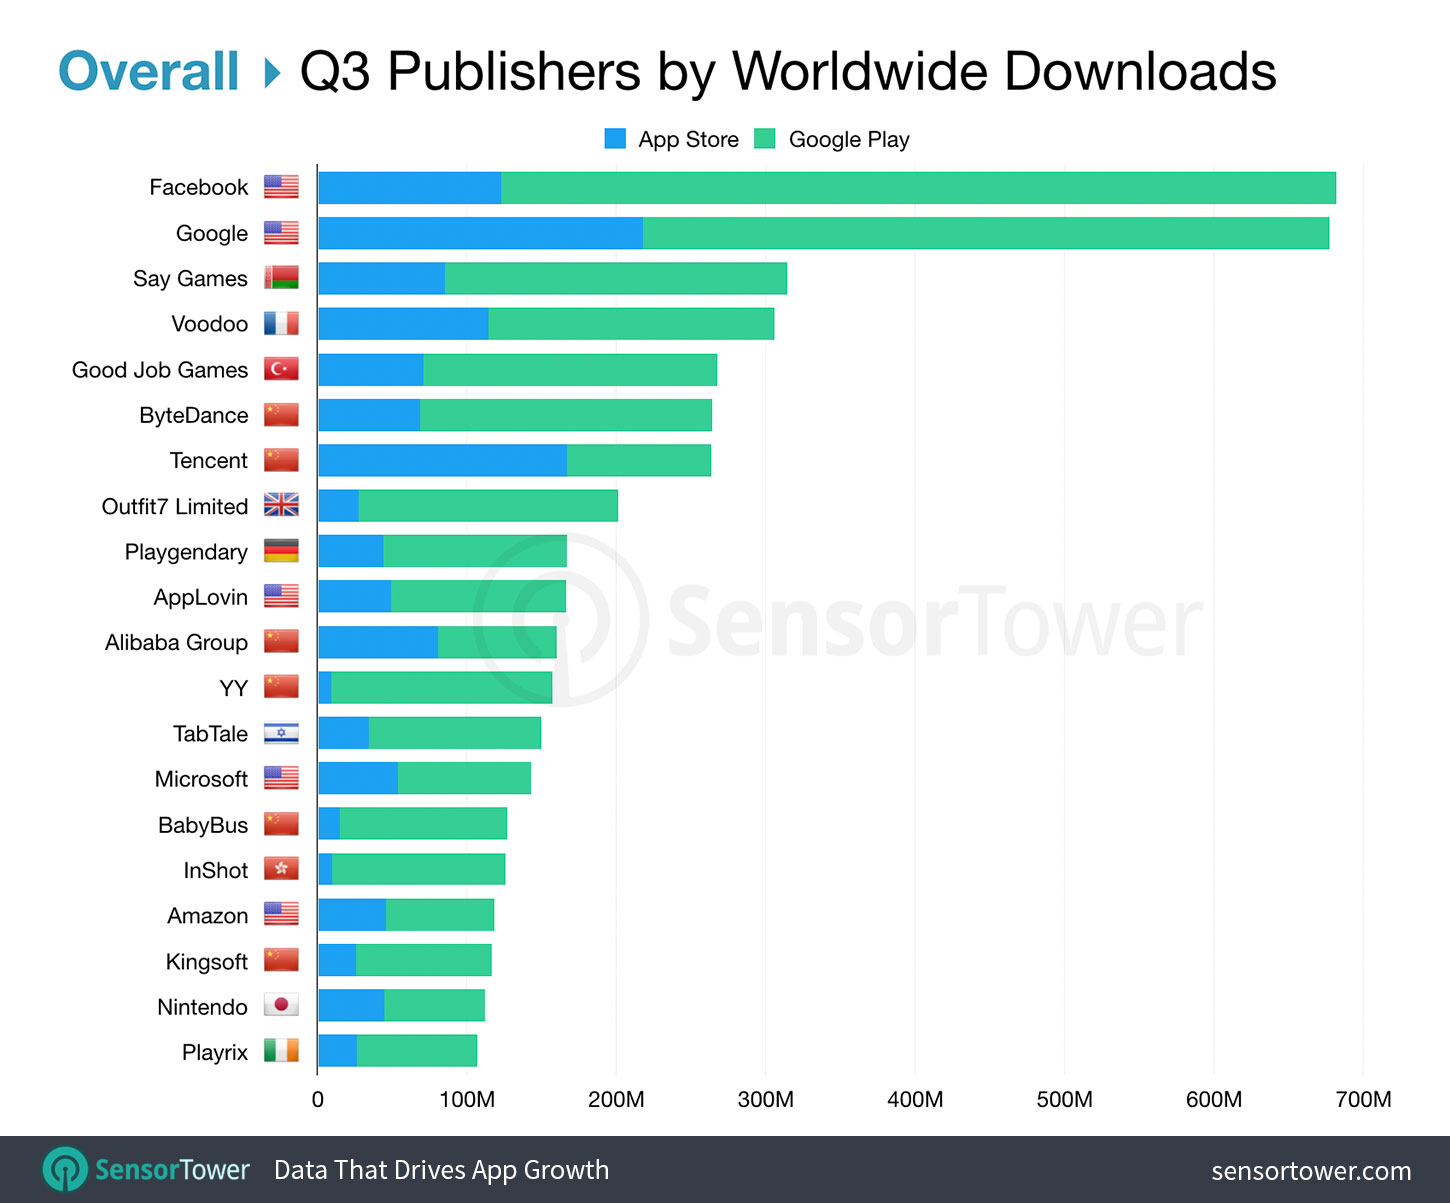 Top Mobile Publishers Worldwide for Q3 2019 by Downloads